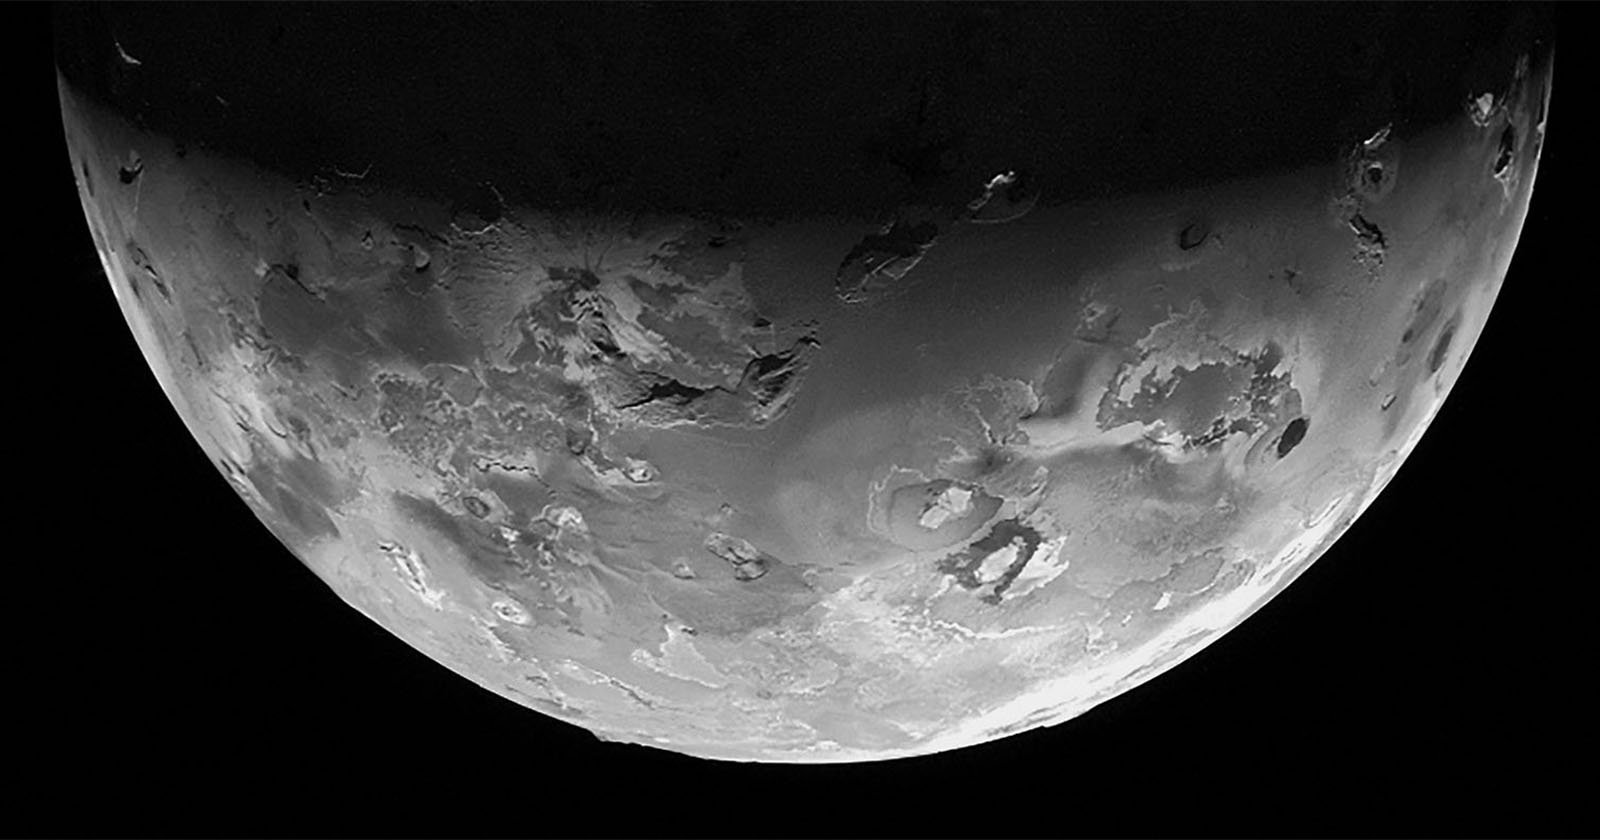 New Juno Images Show Volcanic Activity on Jupiters Moon, Io